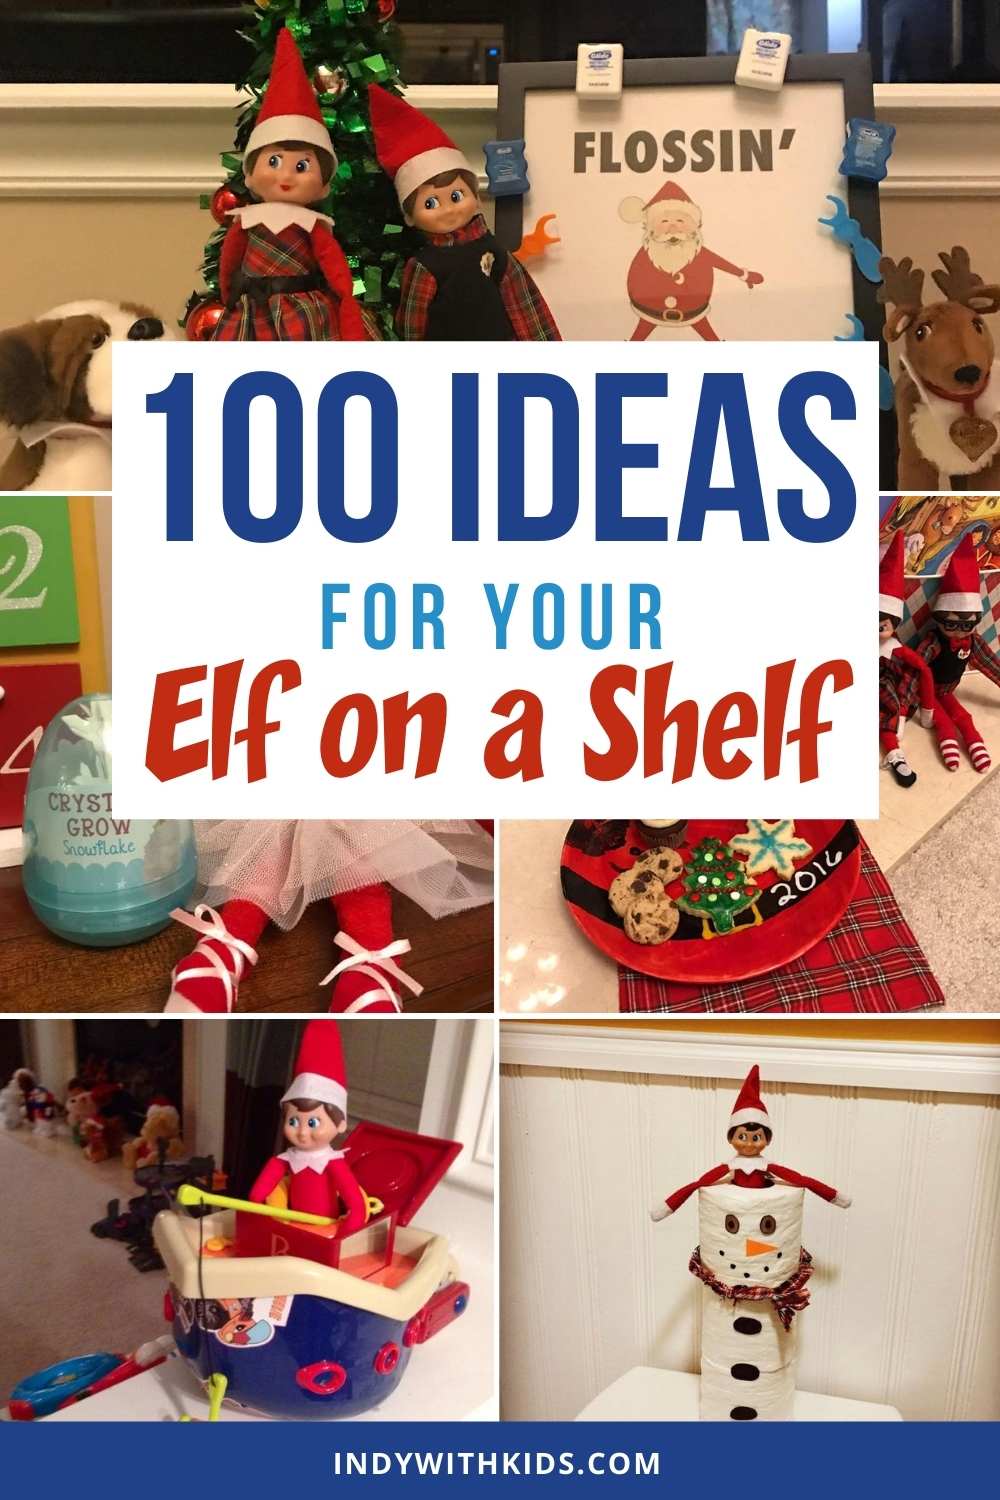 100+ Ideas for your Elf on the Shelf